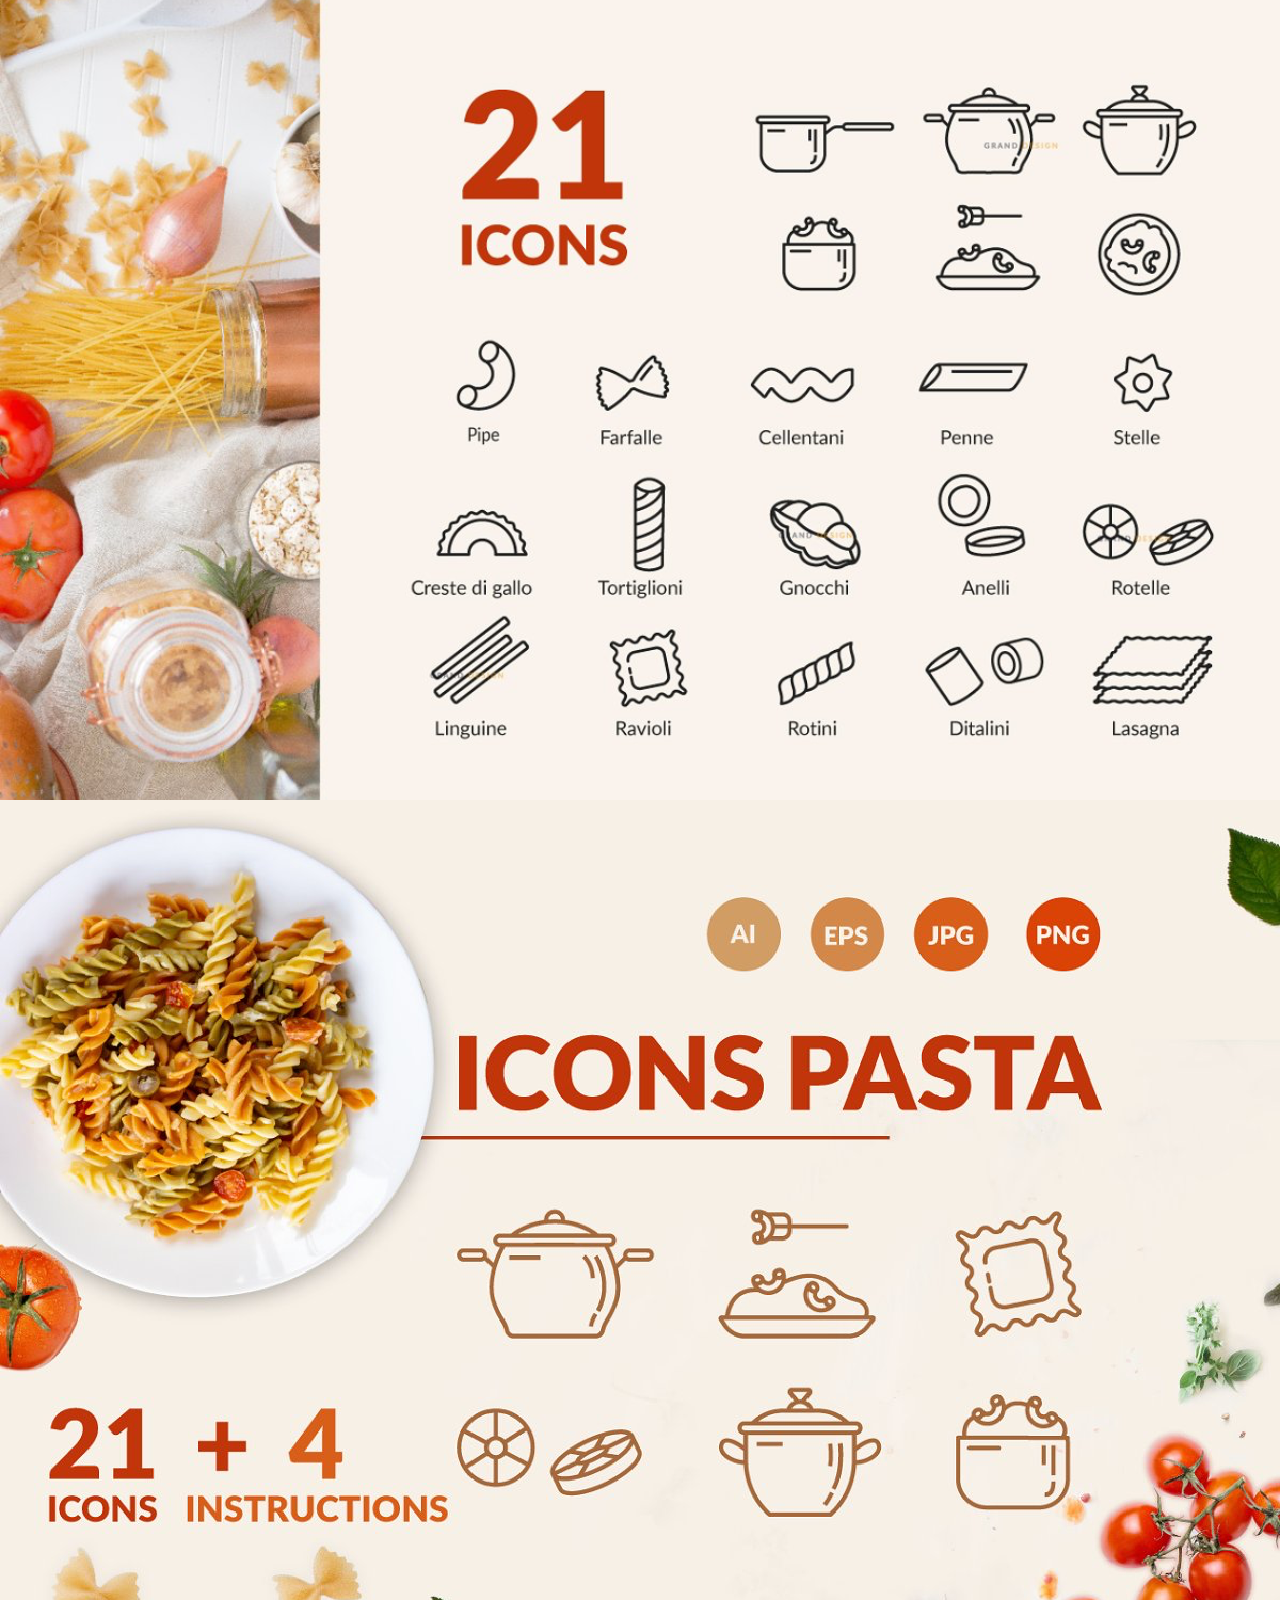 Linear icons for pasta packaging pinterest image.